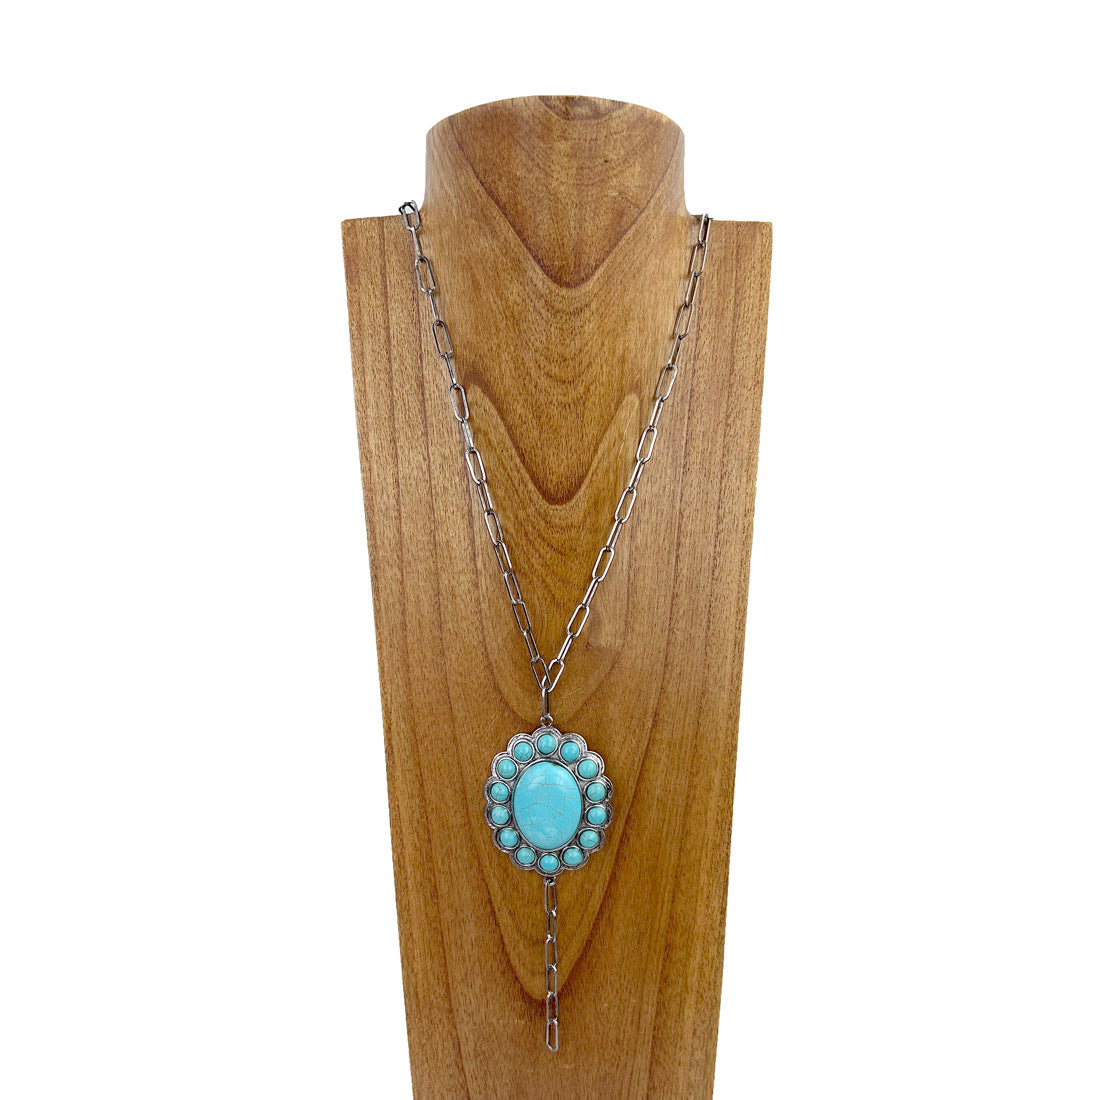 NKZ230930-33               26 Inches silver metal chain with silver oval and blue turquoise stone Necklace